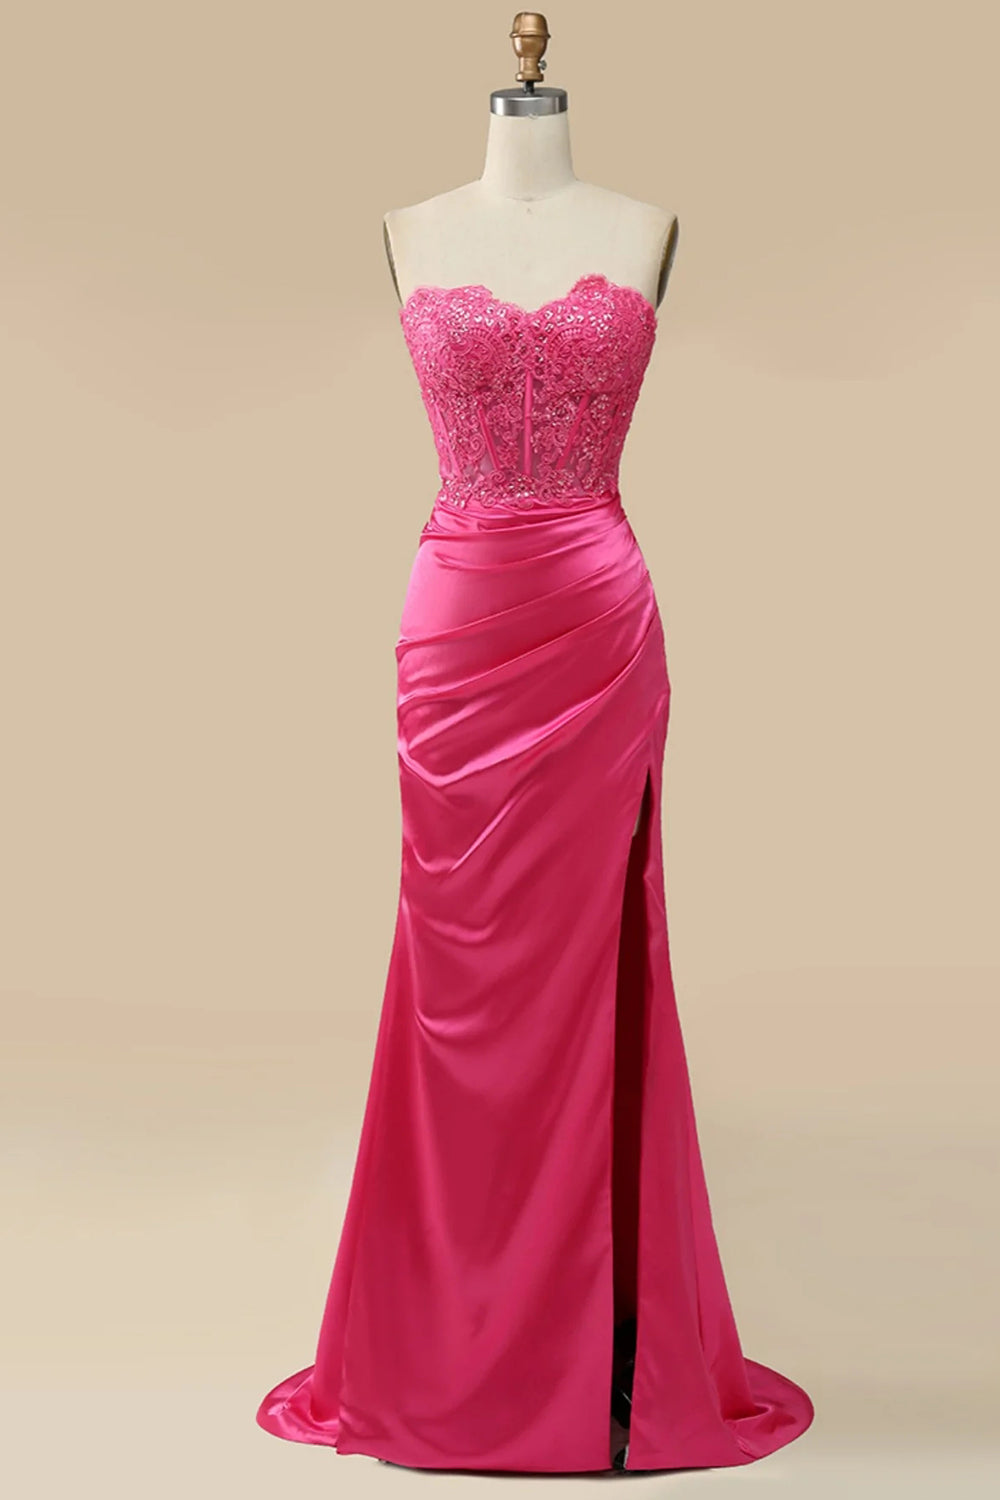 Sparkly Hot Pink Corset Long Sheath Corset Prom Dress with Slit Gowns, Unique Wedding Ideas